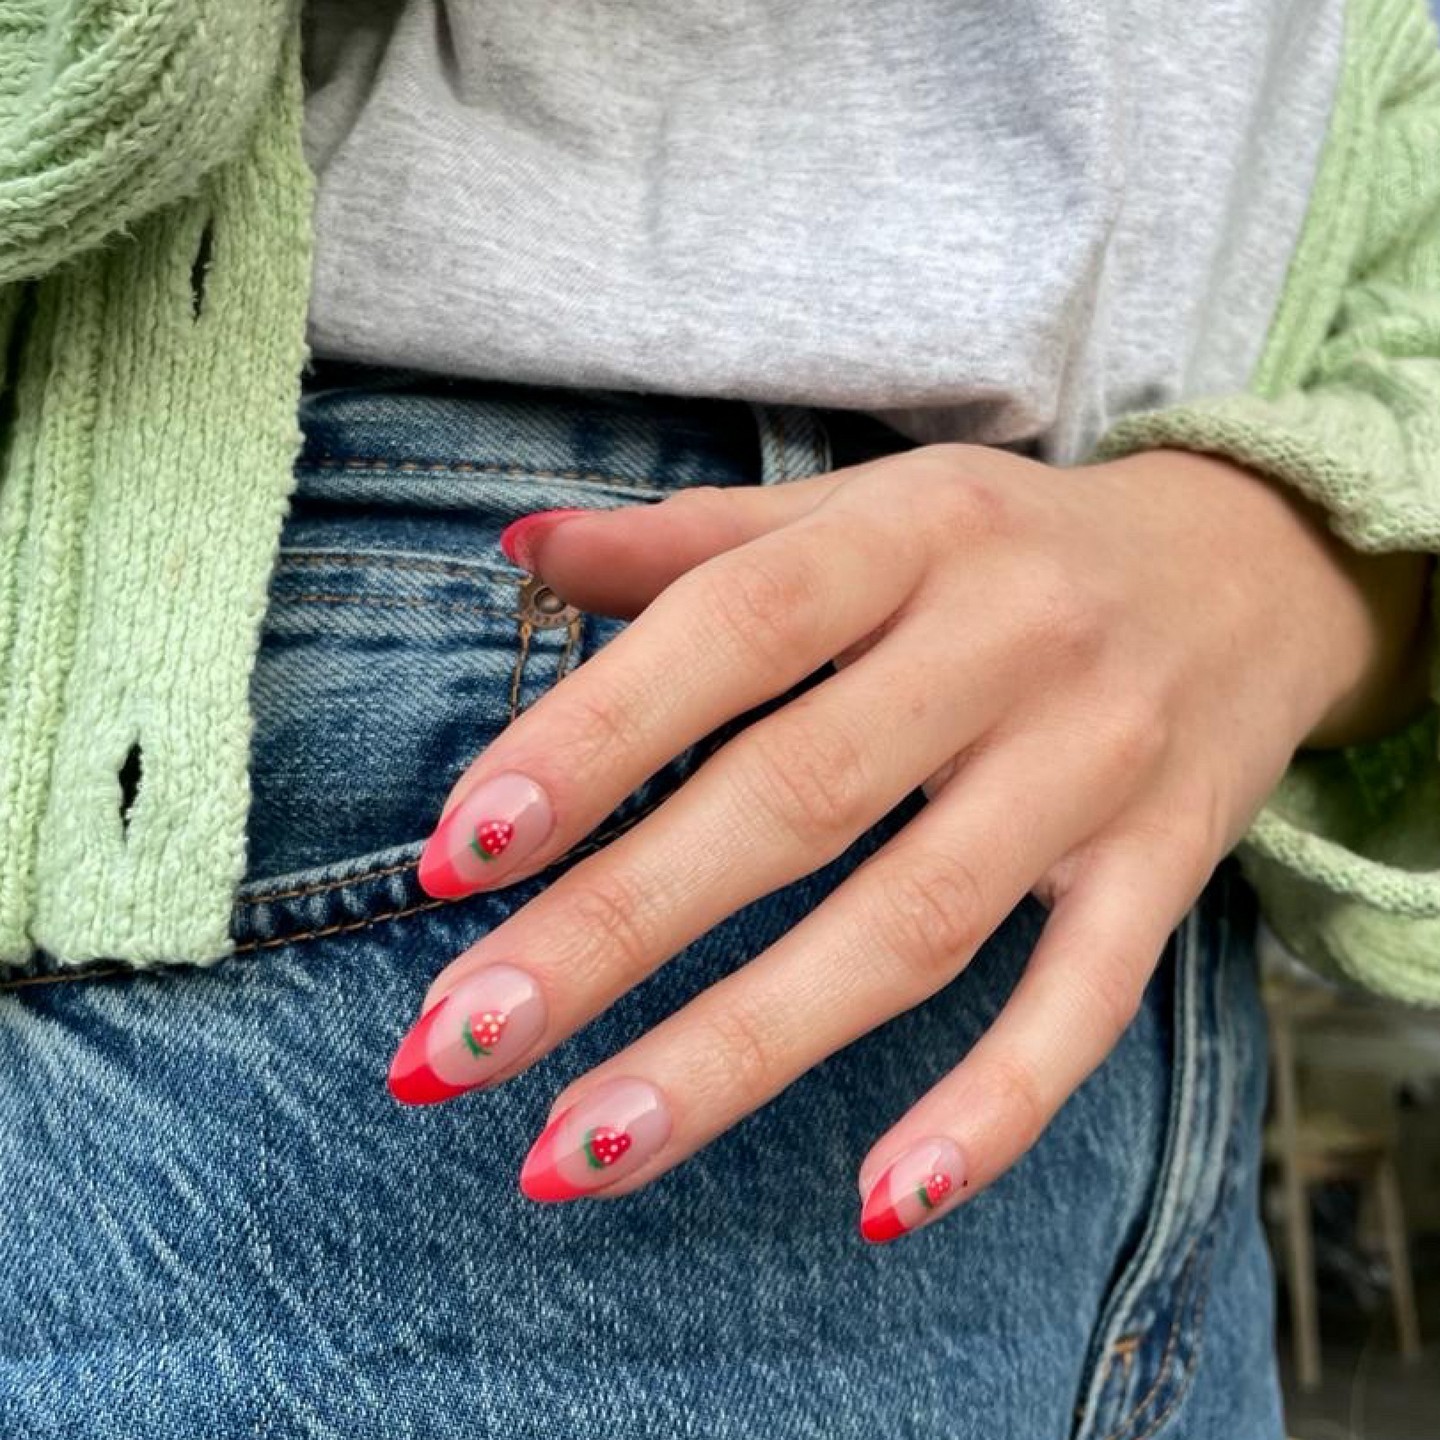 8 Foods for Stronger Nails to Add to Your Diet